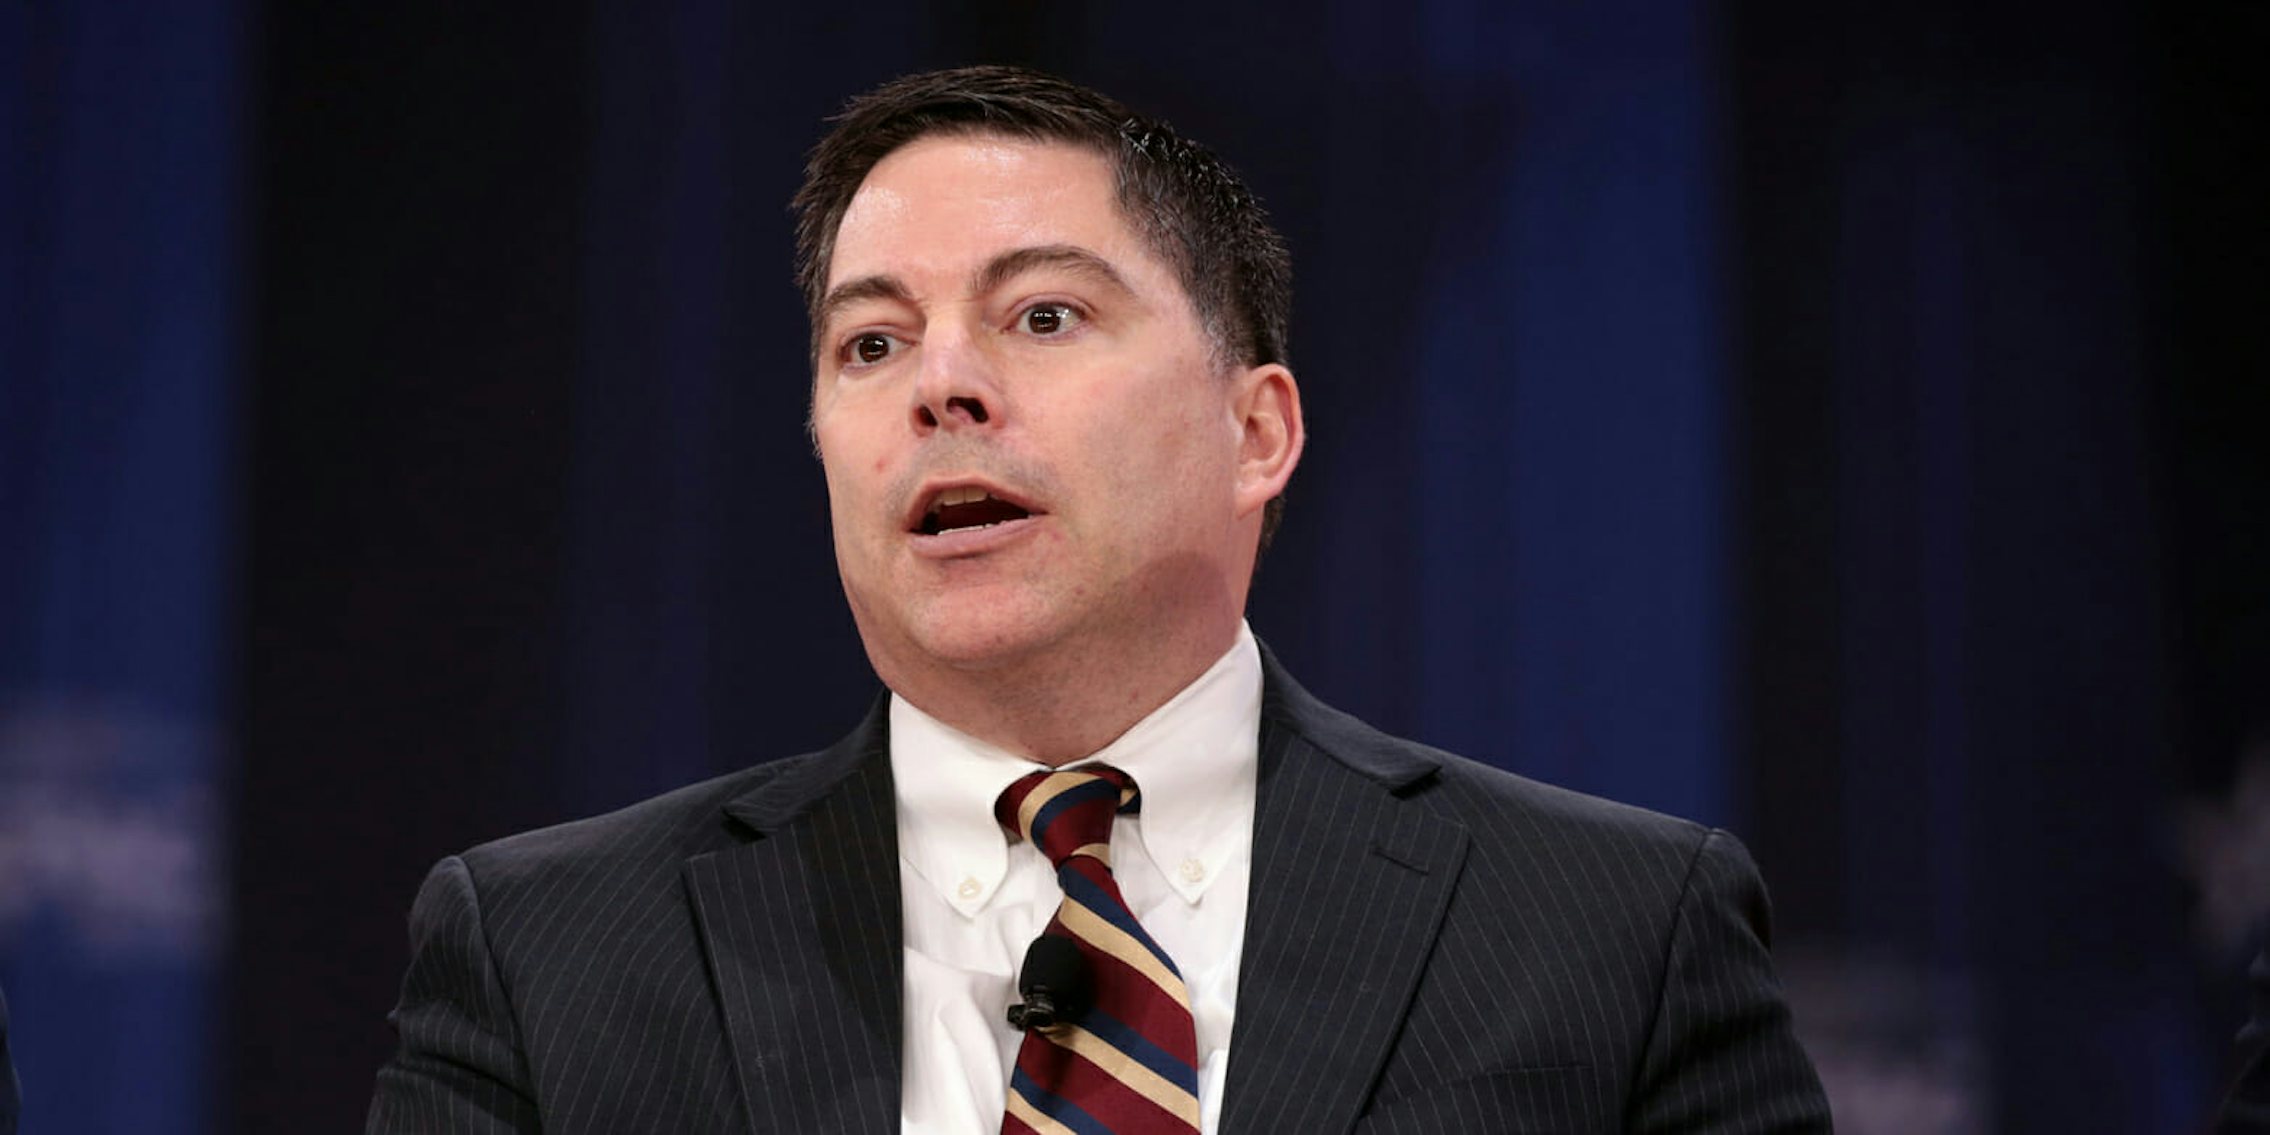 Federal Communications Commission (FCC) Commissioner Michael O’Rielly, a Republican, violated the Hatch Act when he advocated for President Donald Trump's reelection at the Conservative Political Action Conference (CPAC) earlier this year, according to government officials. 